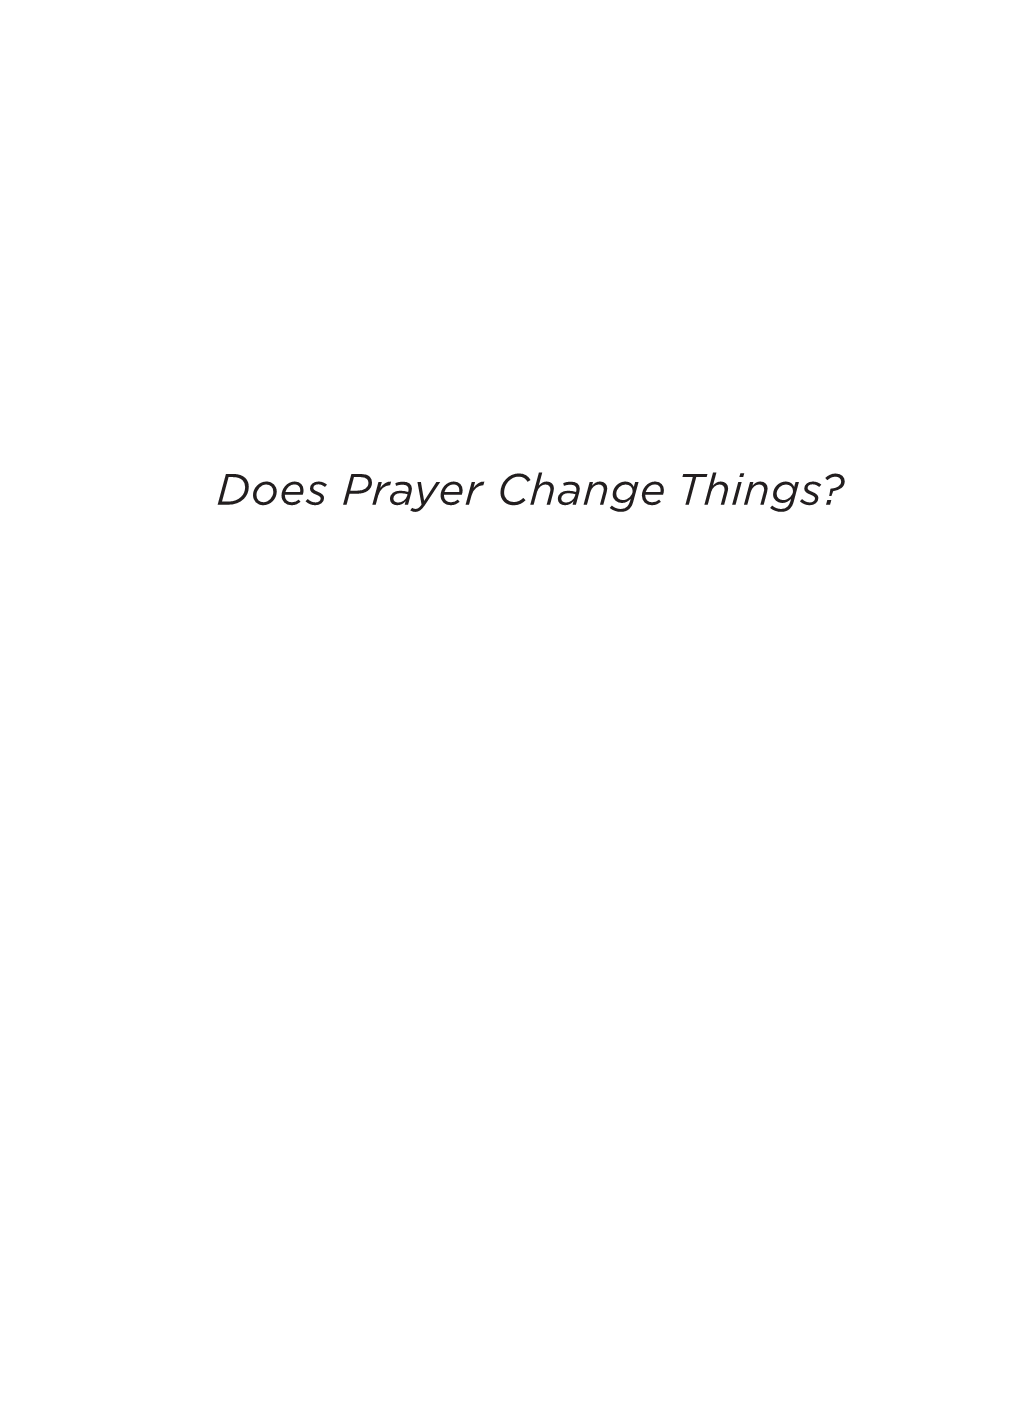 Does Prayer Change Things? the Crucial Questions Series by R